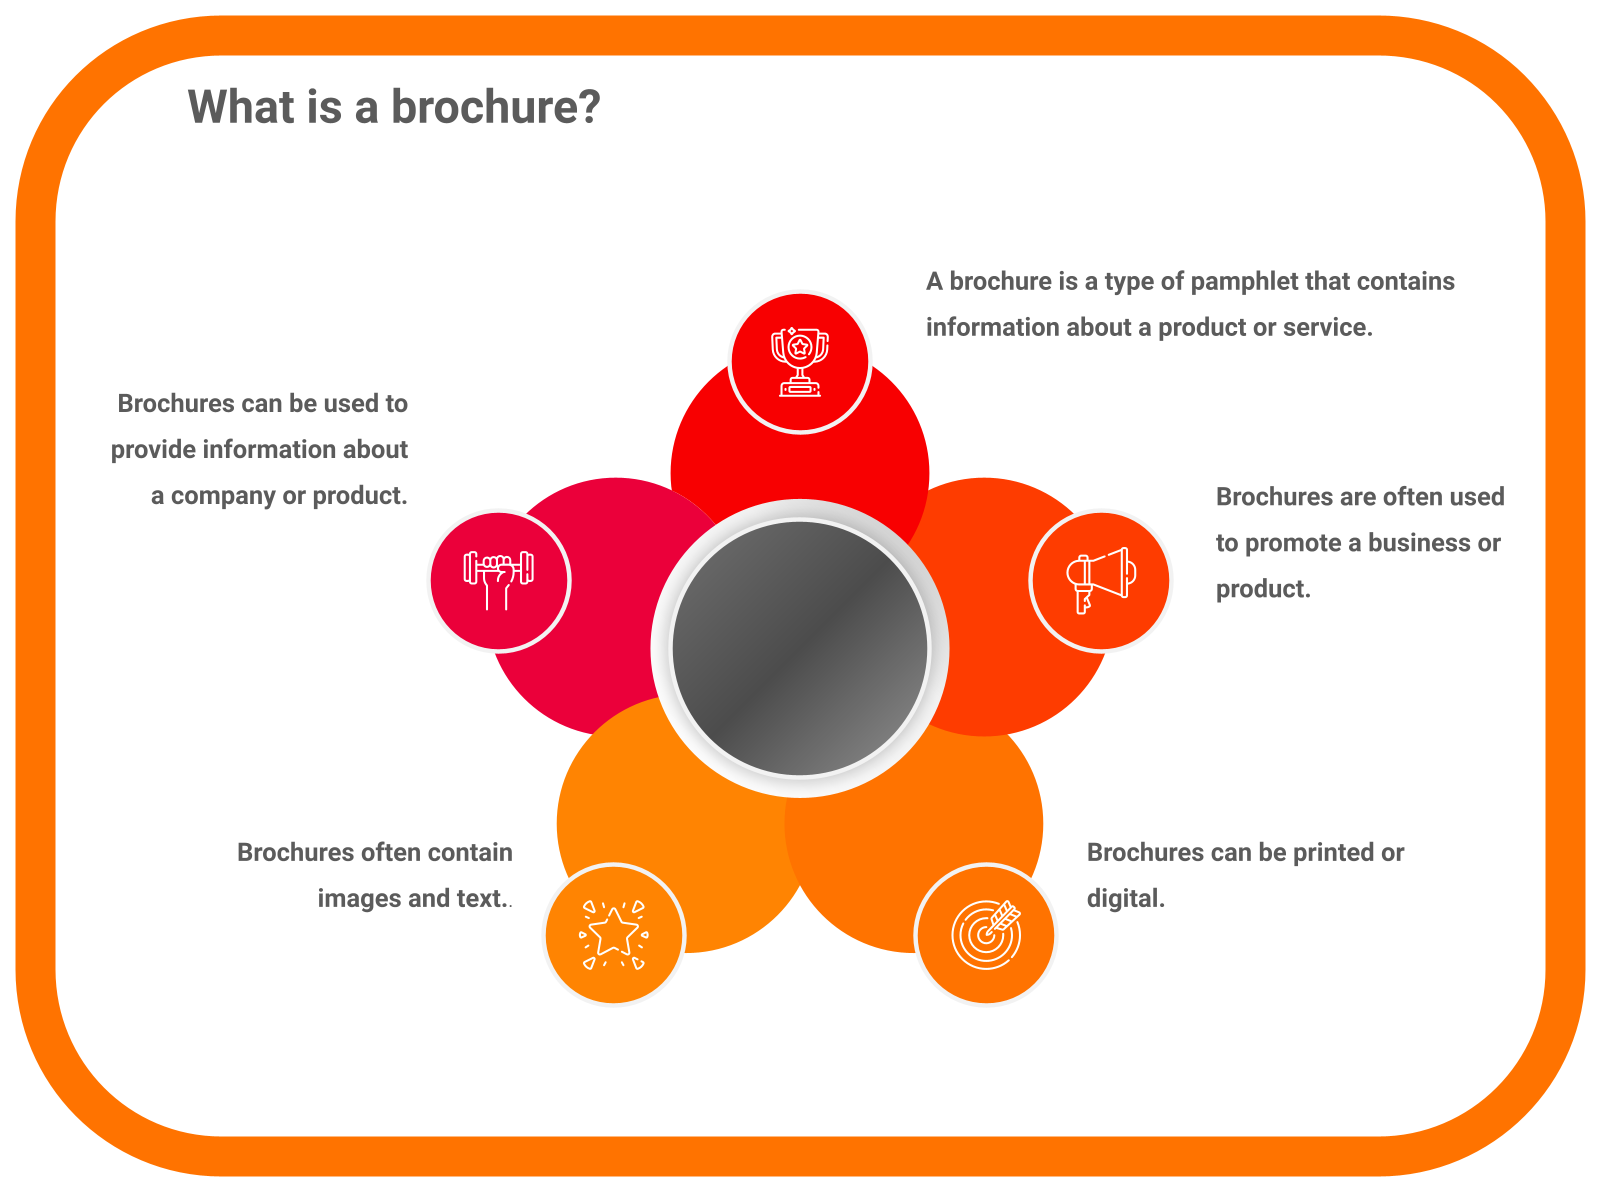 What is a brochure?